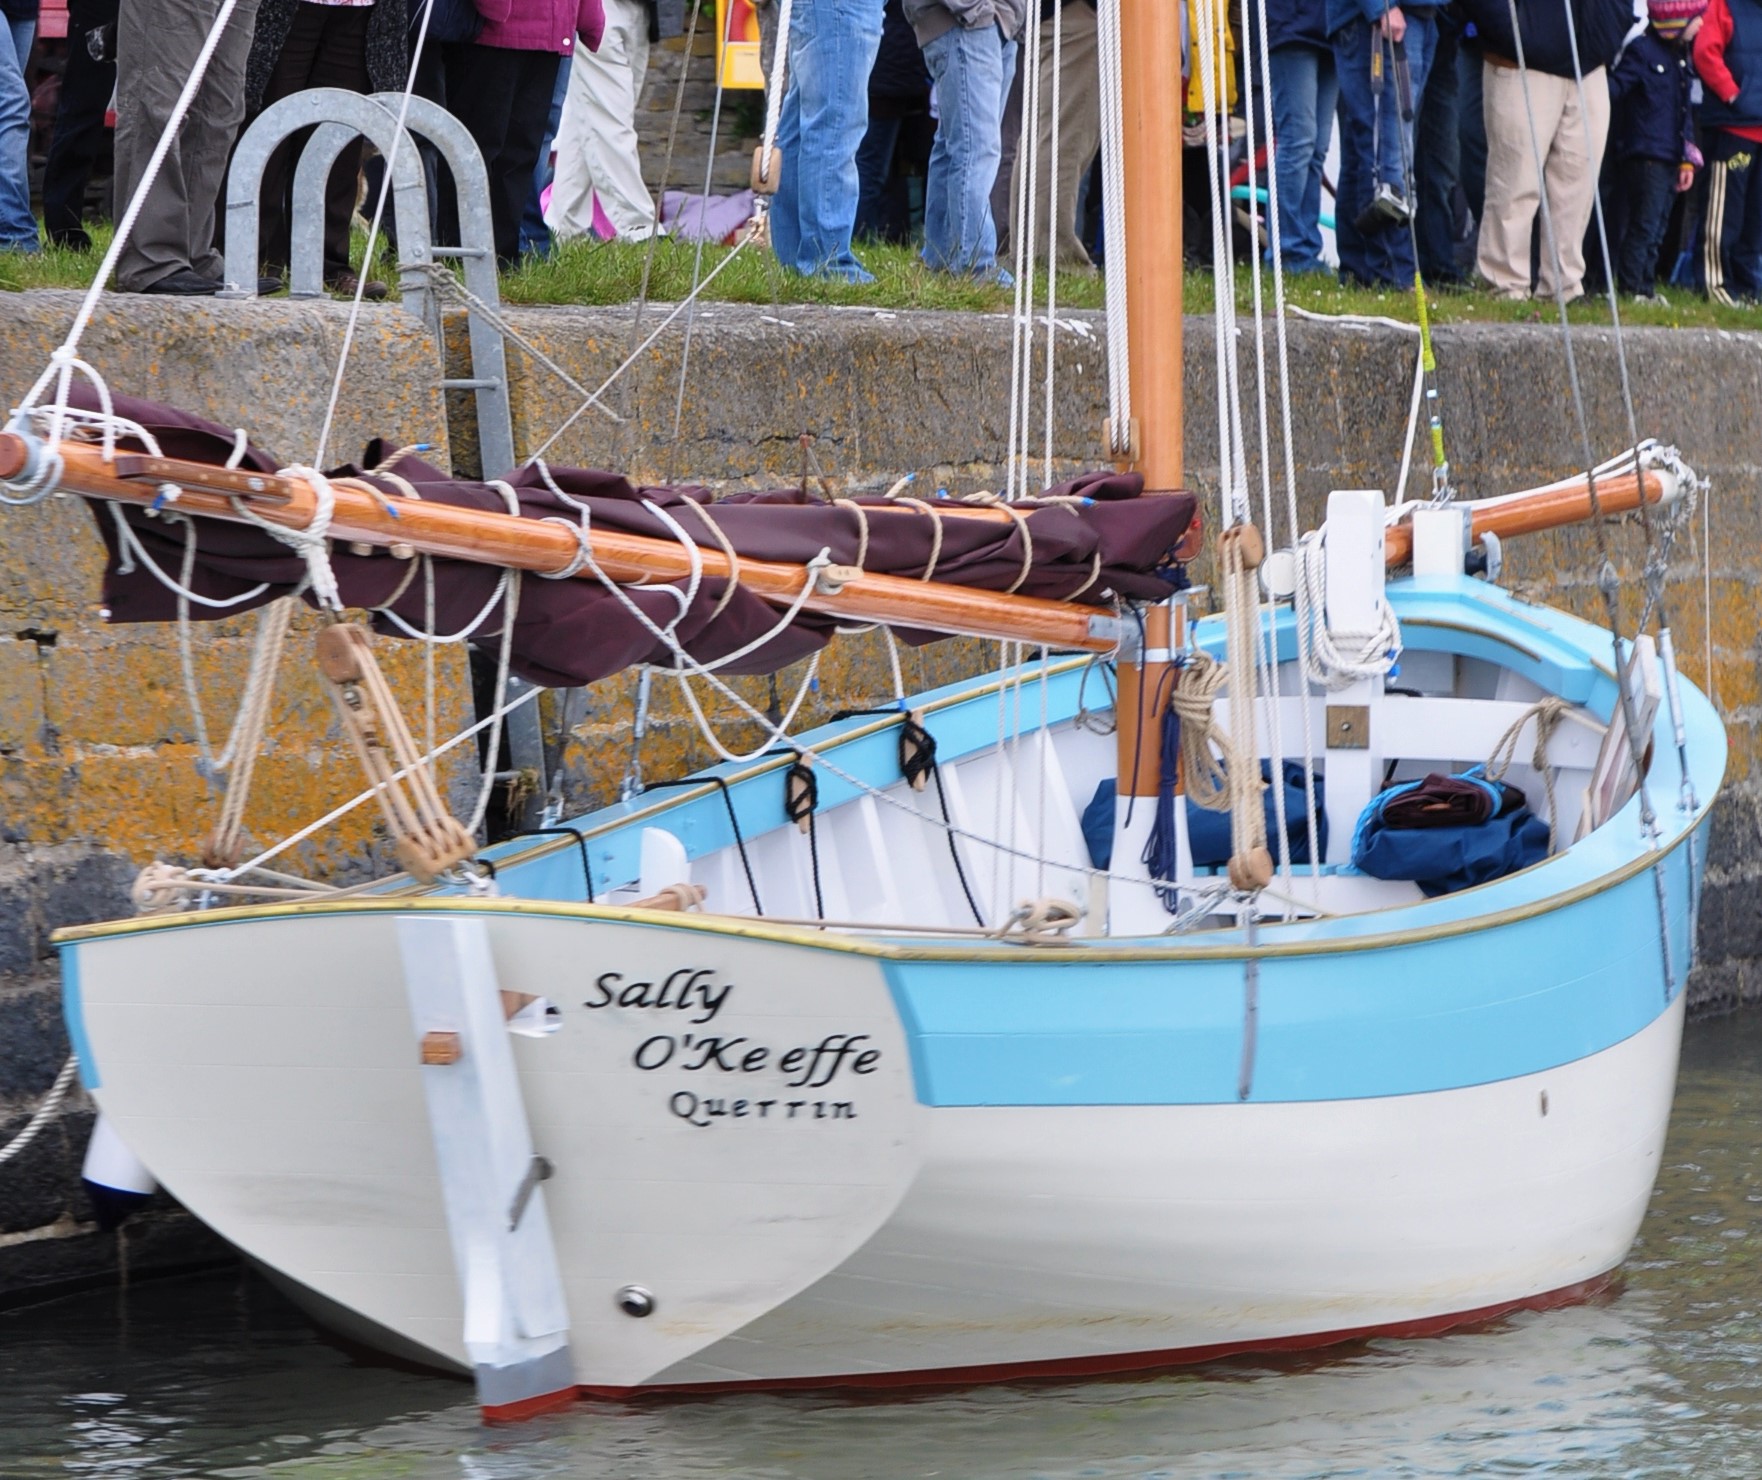 Sally O'Keeffe alongside at Querrin Pier during her launch, May 2012.